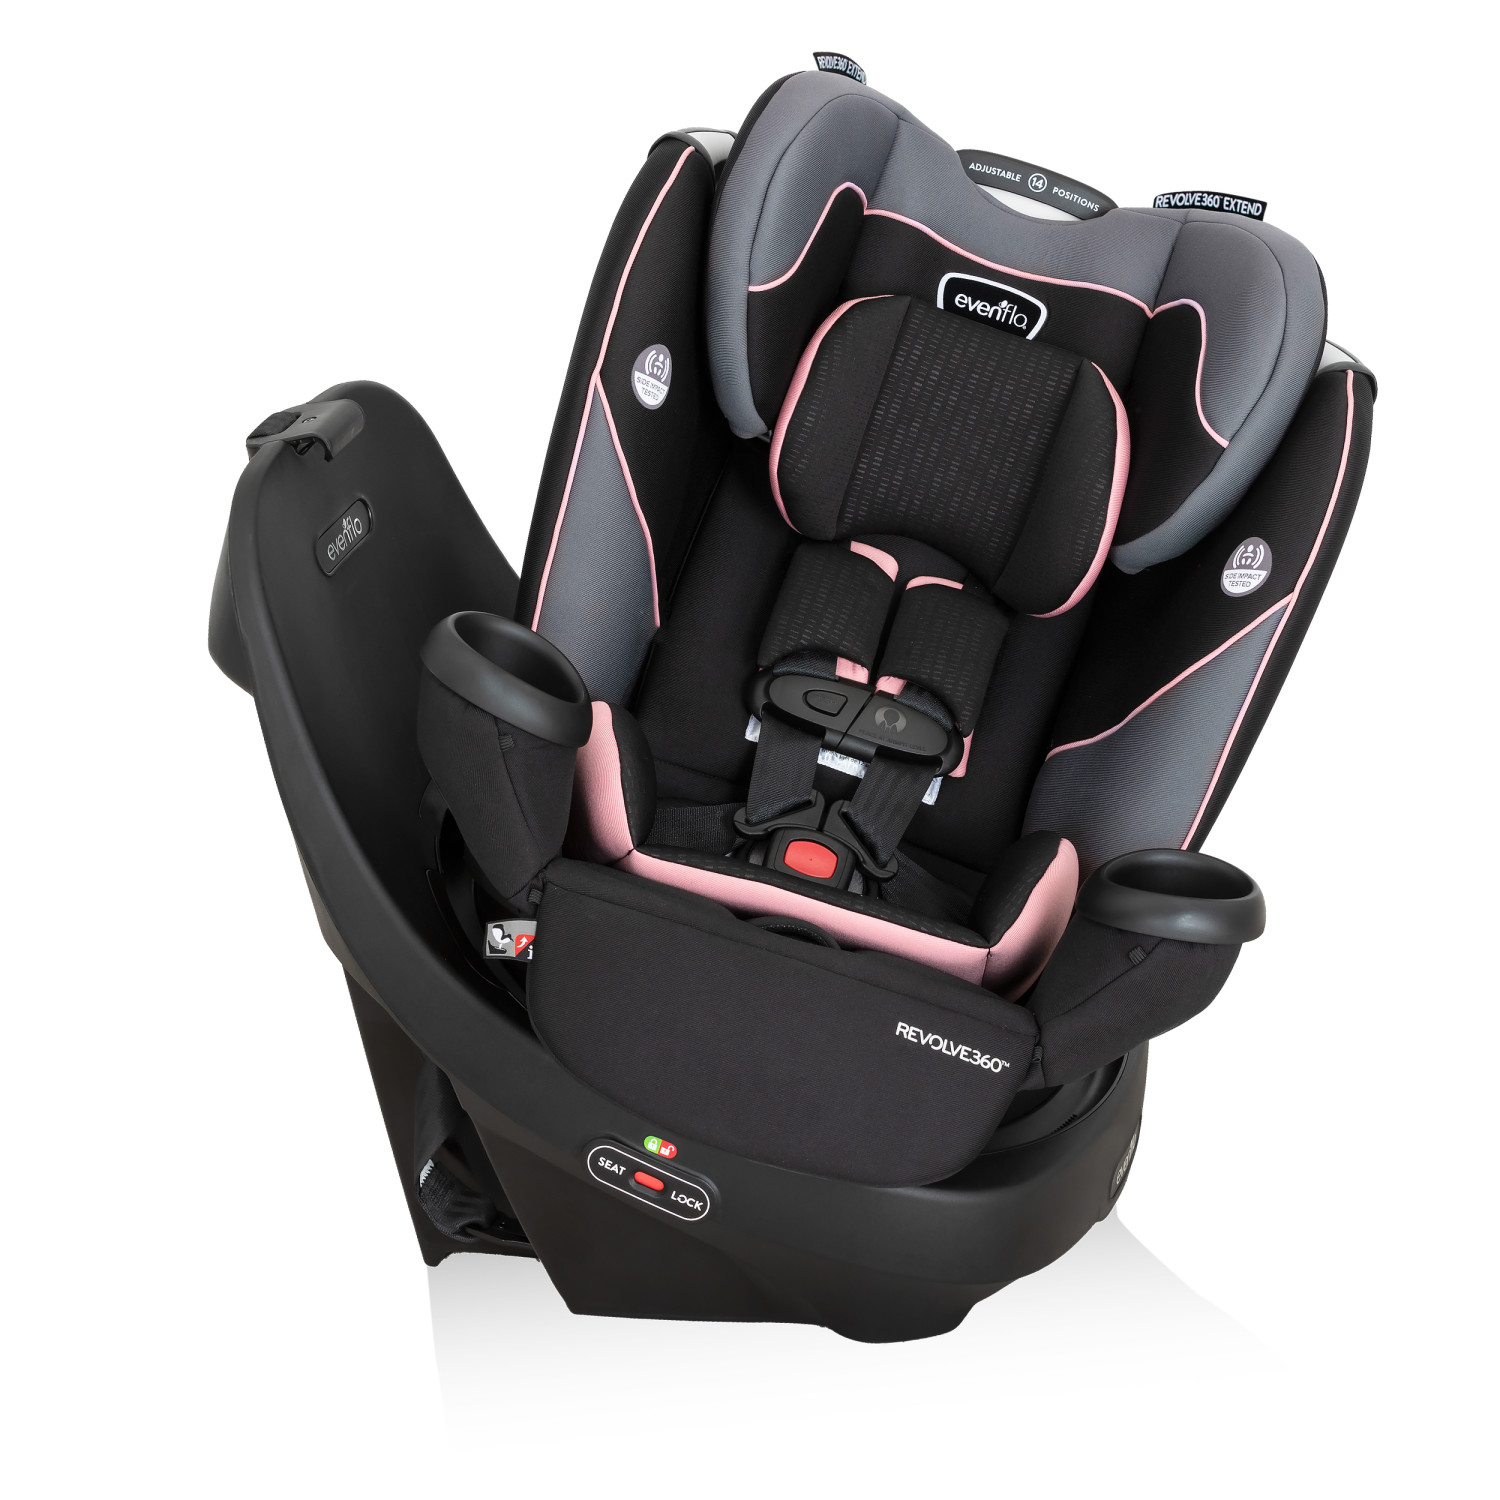 Evenflo Revolve360 Rotational All-In-One Convertible Car Seat (Ainsley Pink) - image 5 of 26